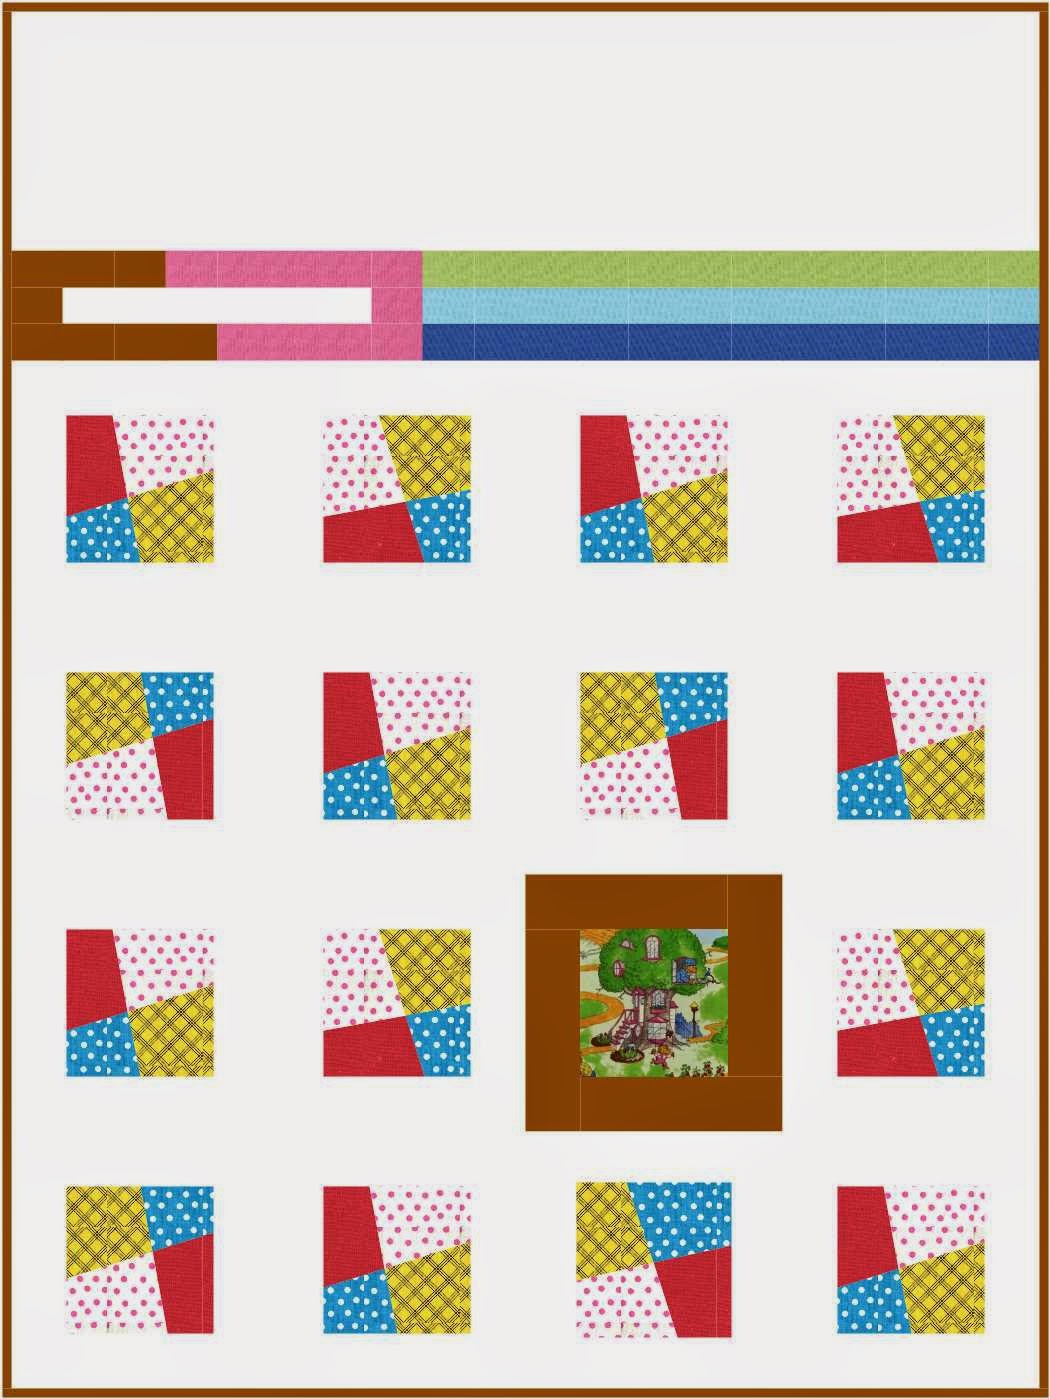 http://www.craftsy.com/pattern/quilting/home-decor/slice--roll-kinderquilt-pattern/42231